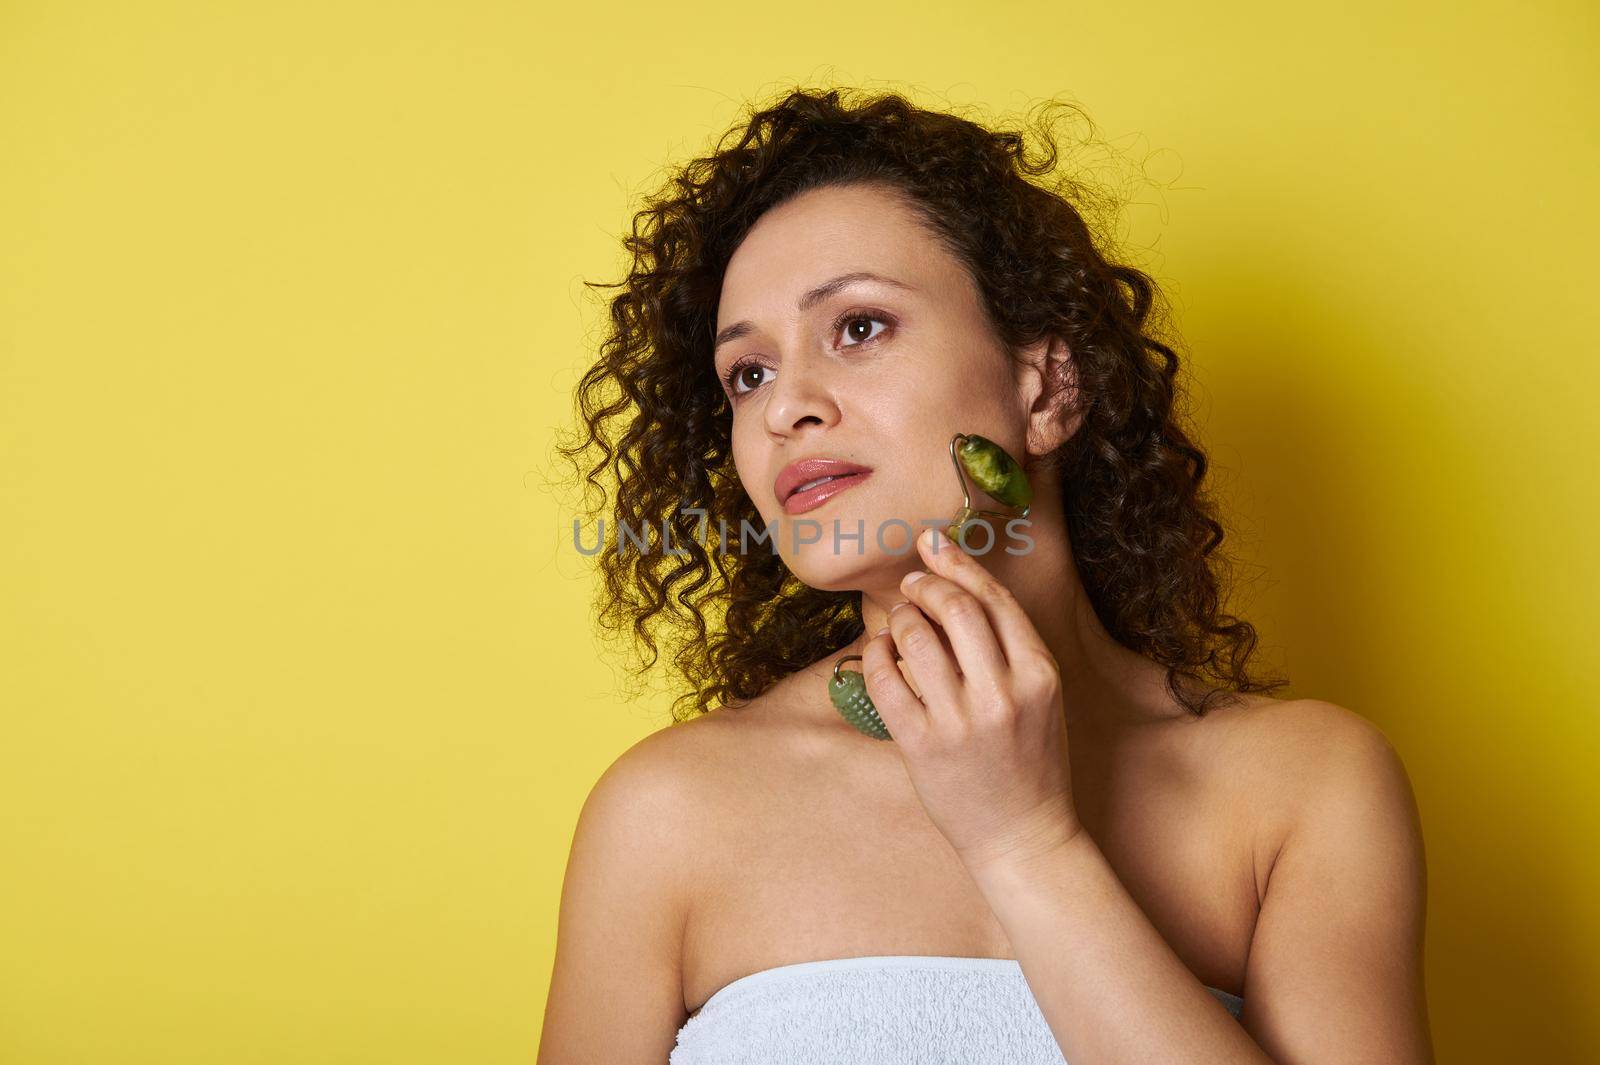 Beautiful young woman with curly hair using jade roller for facial massage and skin care. Shot with soft shadow over yellow background with copy space.